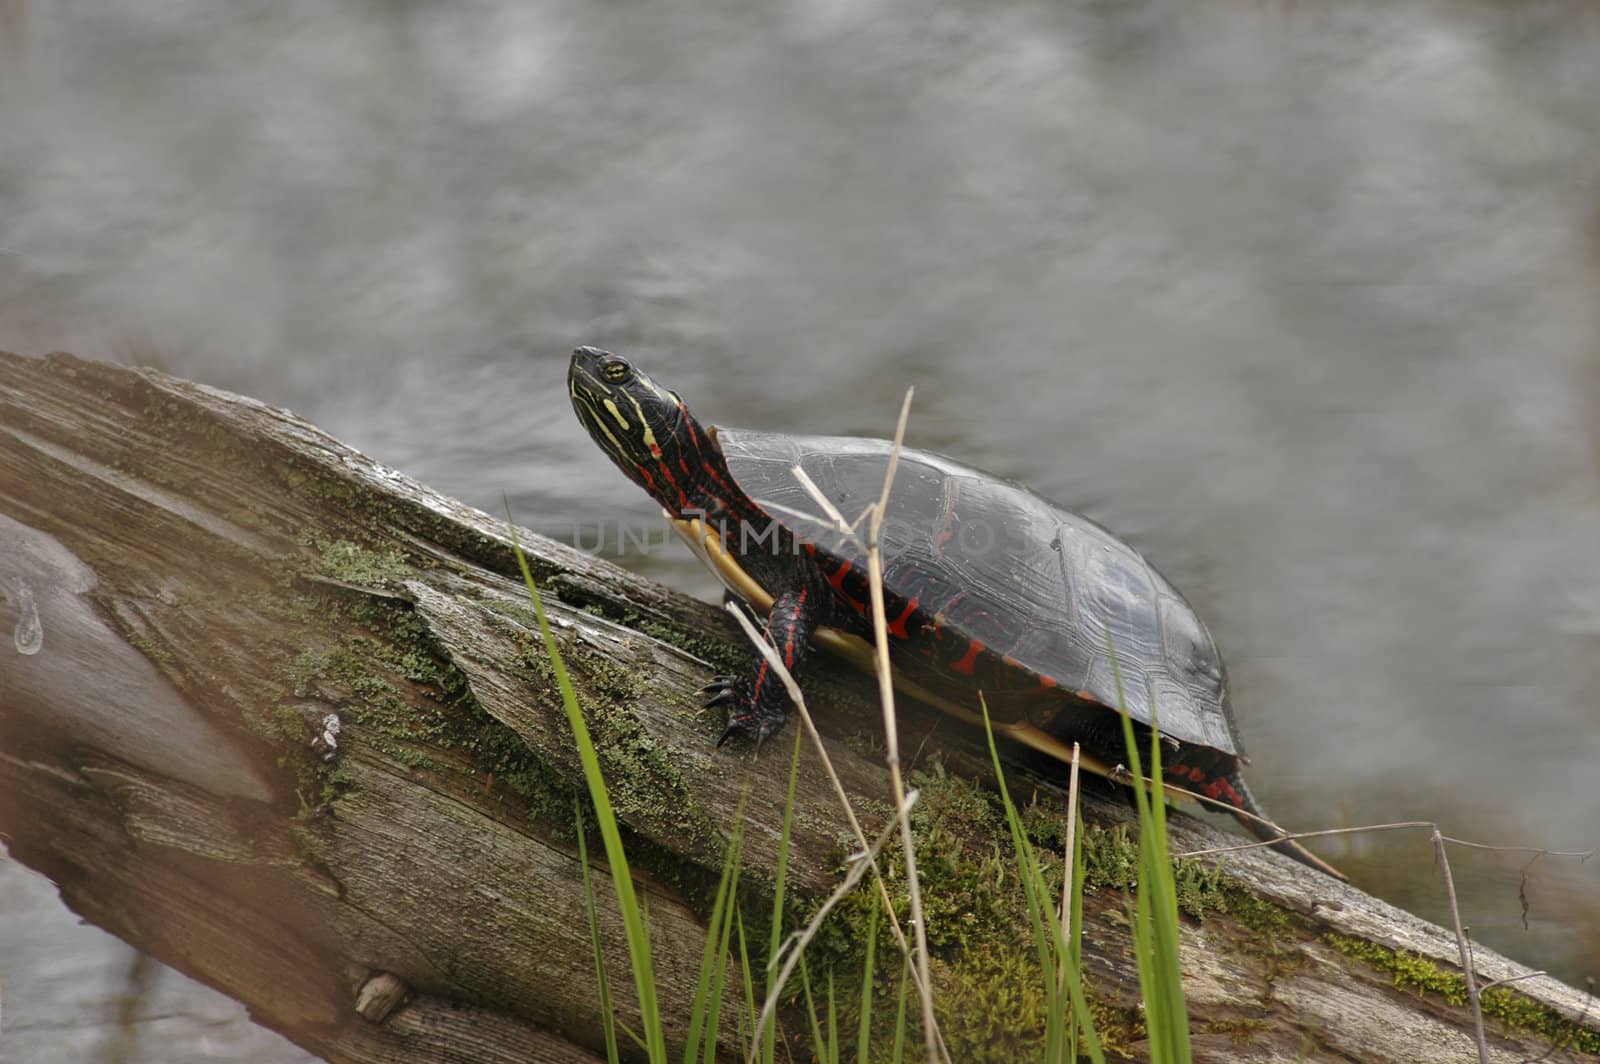 Painted turtle slowly crawling up a log